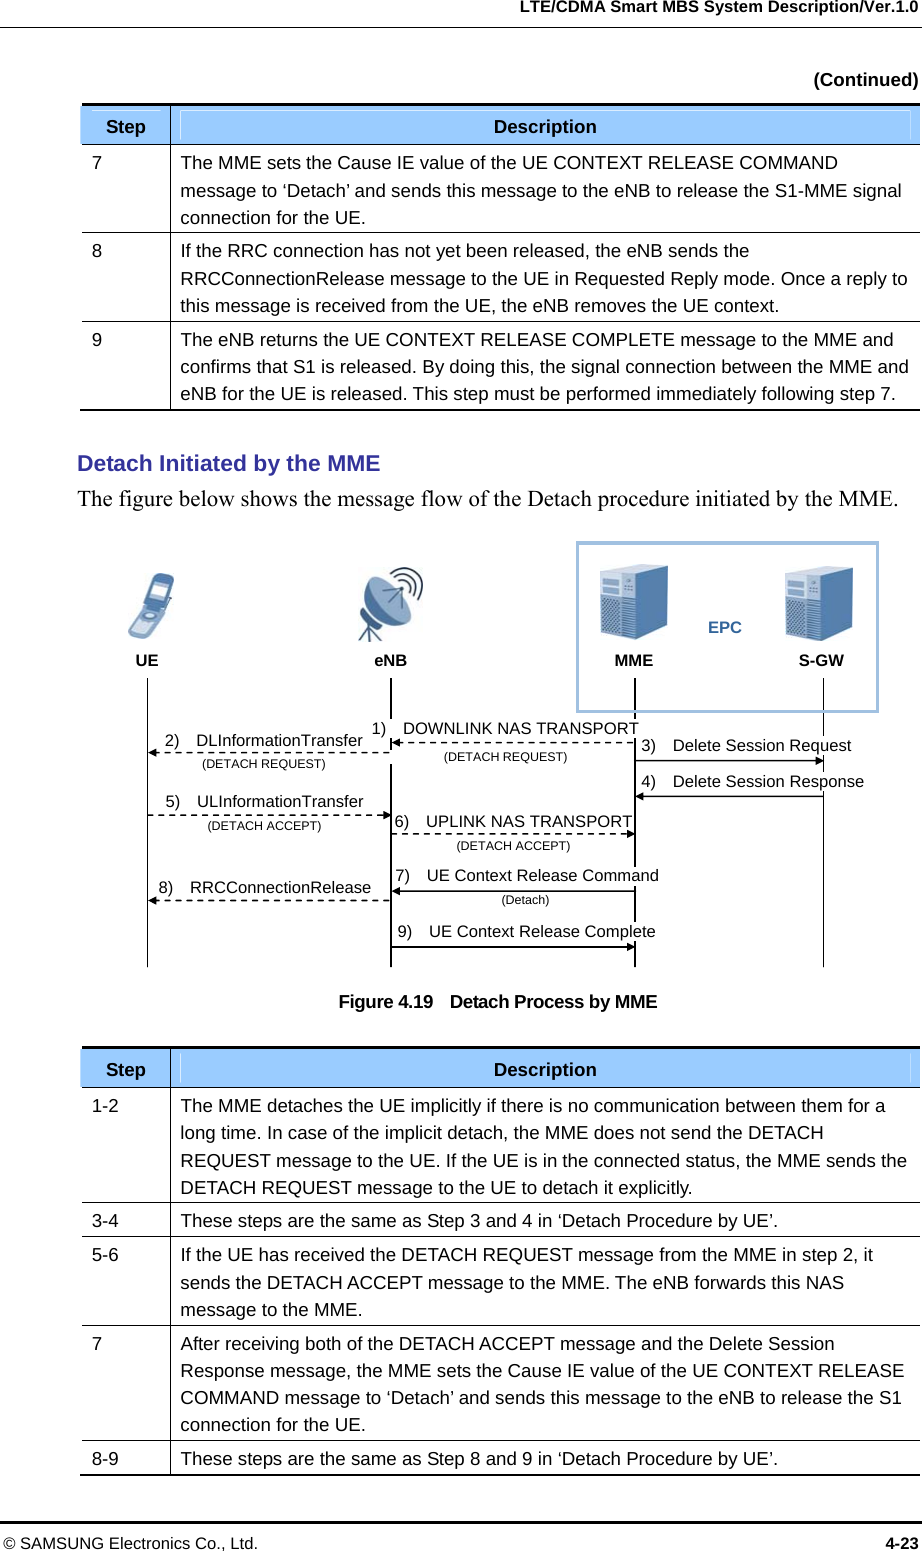   LTE/CDMA Smart MBS System Description/Ver.1.0 © SAMSUNG Electronics Co., Ltd.  4-23  (Continued) Step  Description 7  The MME sets the Cause IE value of the UE CONTEXT RELEASE COMMAND message to ‘Detach’ and sends this message to the eNB to release the S1-MME signal connection for the UE. 8  If the RRC connection has not yet been released, the eNB sends the RRCConnectionRelease message to the UE in Requested Reply mode. Once a reply to this message is received from the UE, the eNB removes the UE context. 9  The eNB returns the UE CONTEXT RELEASE COMPLETE message to the MME and confirms that S1 is released. By doing this, the signal connection between the MME and eNB for the UE is released. This step must be performed immediately following step 7.  Detach Initiated by the MME The figure below shows the message flow of the Detach procedure initiated by the MME.  Figure 4.19    Detach Process by MME  Step  Description 1-2  The MME detaches the UE implicitly if there is no communication between them for a long time. In case of the implicit detach, the MME does not send the DETACH REQUEST message to the UE. If the UE is in the connected status, the MME sends the DETACH REQUEST message to the UE to detach it explicitly. 3-4  These steps are the same as Step 3 and 4 in ‘Detach Procedure by UE’. 5-6  If the UE has received the DETACH REQUEST message from the MME in step 2, it sends the DETACH ACCEPT message to the MME. The eNB forwards this NAS message to the MME. 7  After receiving both of the DETACH ACCEPT message and the Delete Session Response message, the MME sets the Cause IE value of the UE CONTEXT RELEASE COMMAND message to ‘Detach’ and sends this message to the eNB to release the S1 connection for the UE. 8-9  These steps are the same as Step 8 and 9 in ‘Detach Procedure by UE’. UE  eNB MME  S-GW EPC 3)  Delete Session Request 6)  UPLINK NAS TRANSPORT (DETACH ACCEPT) 4)  Delete Session Response 1)  DOWNLINK NAS TRANSPORT           (DETACH REQUEST) 7)  UE Context Release Command (Detach) 9)  UE Context Release Complete 2)  DLInformationTransfer (DETACH REQUEST) 8)  RRCConnectionRelease 5)  ULInformationTransfer (DETACH ACCEPT) 